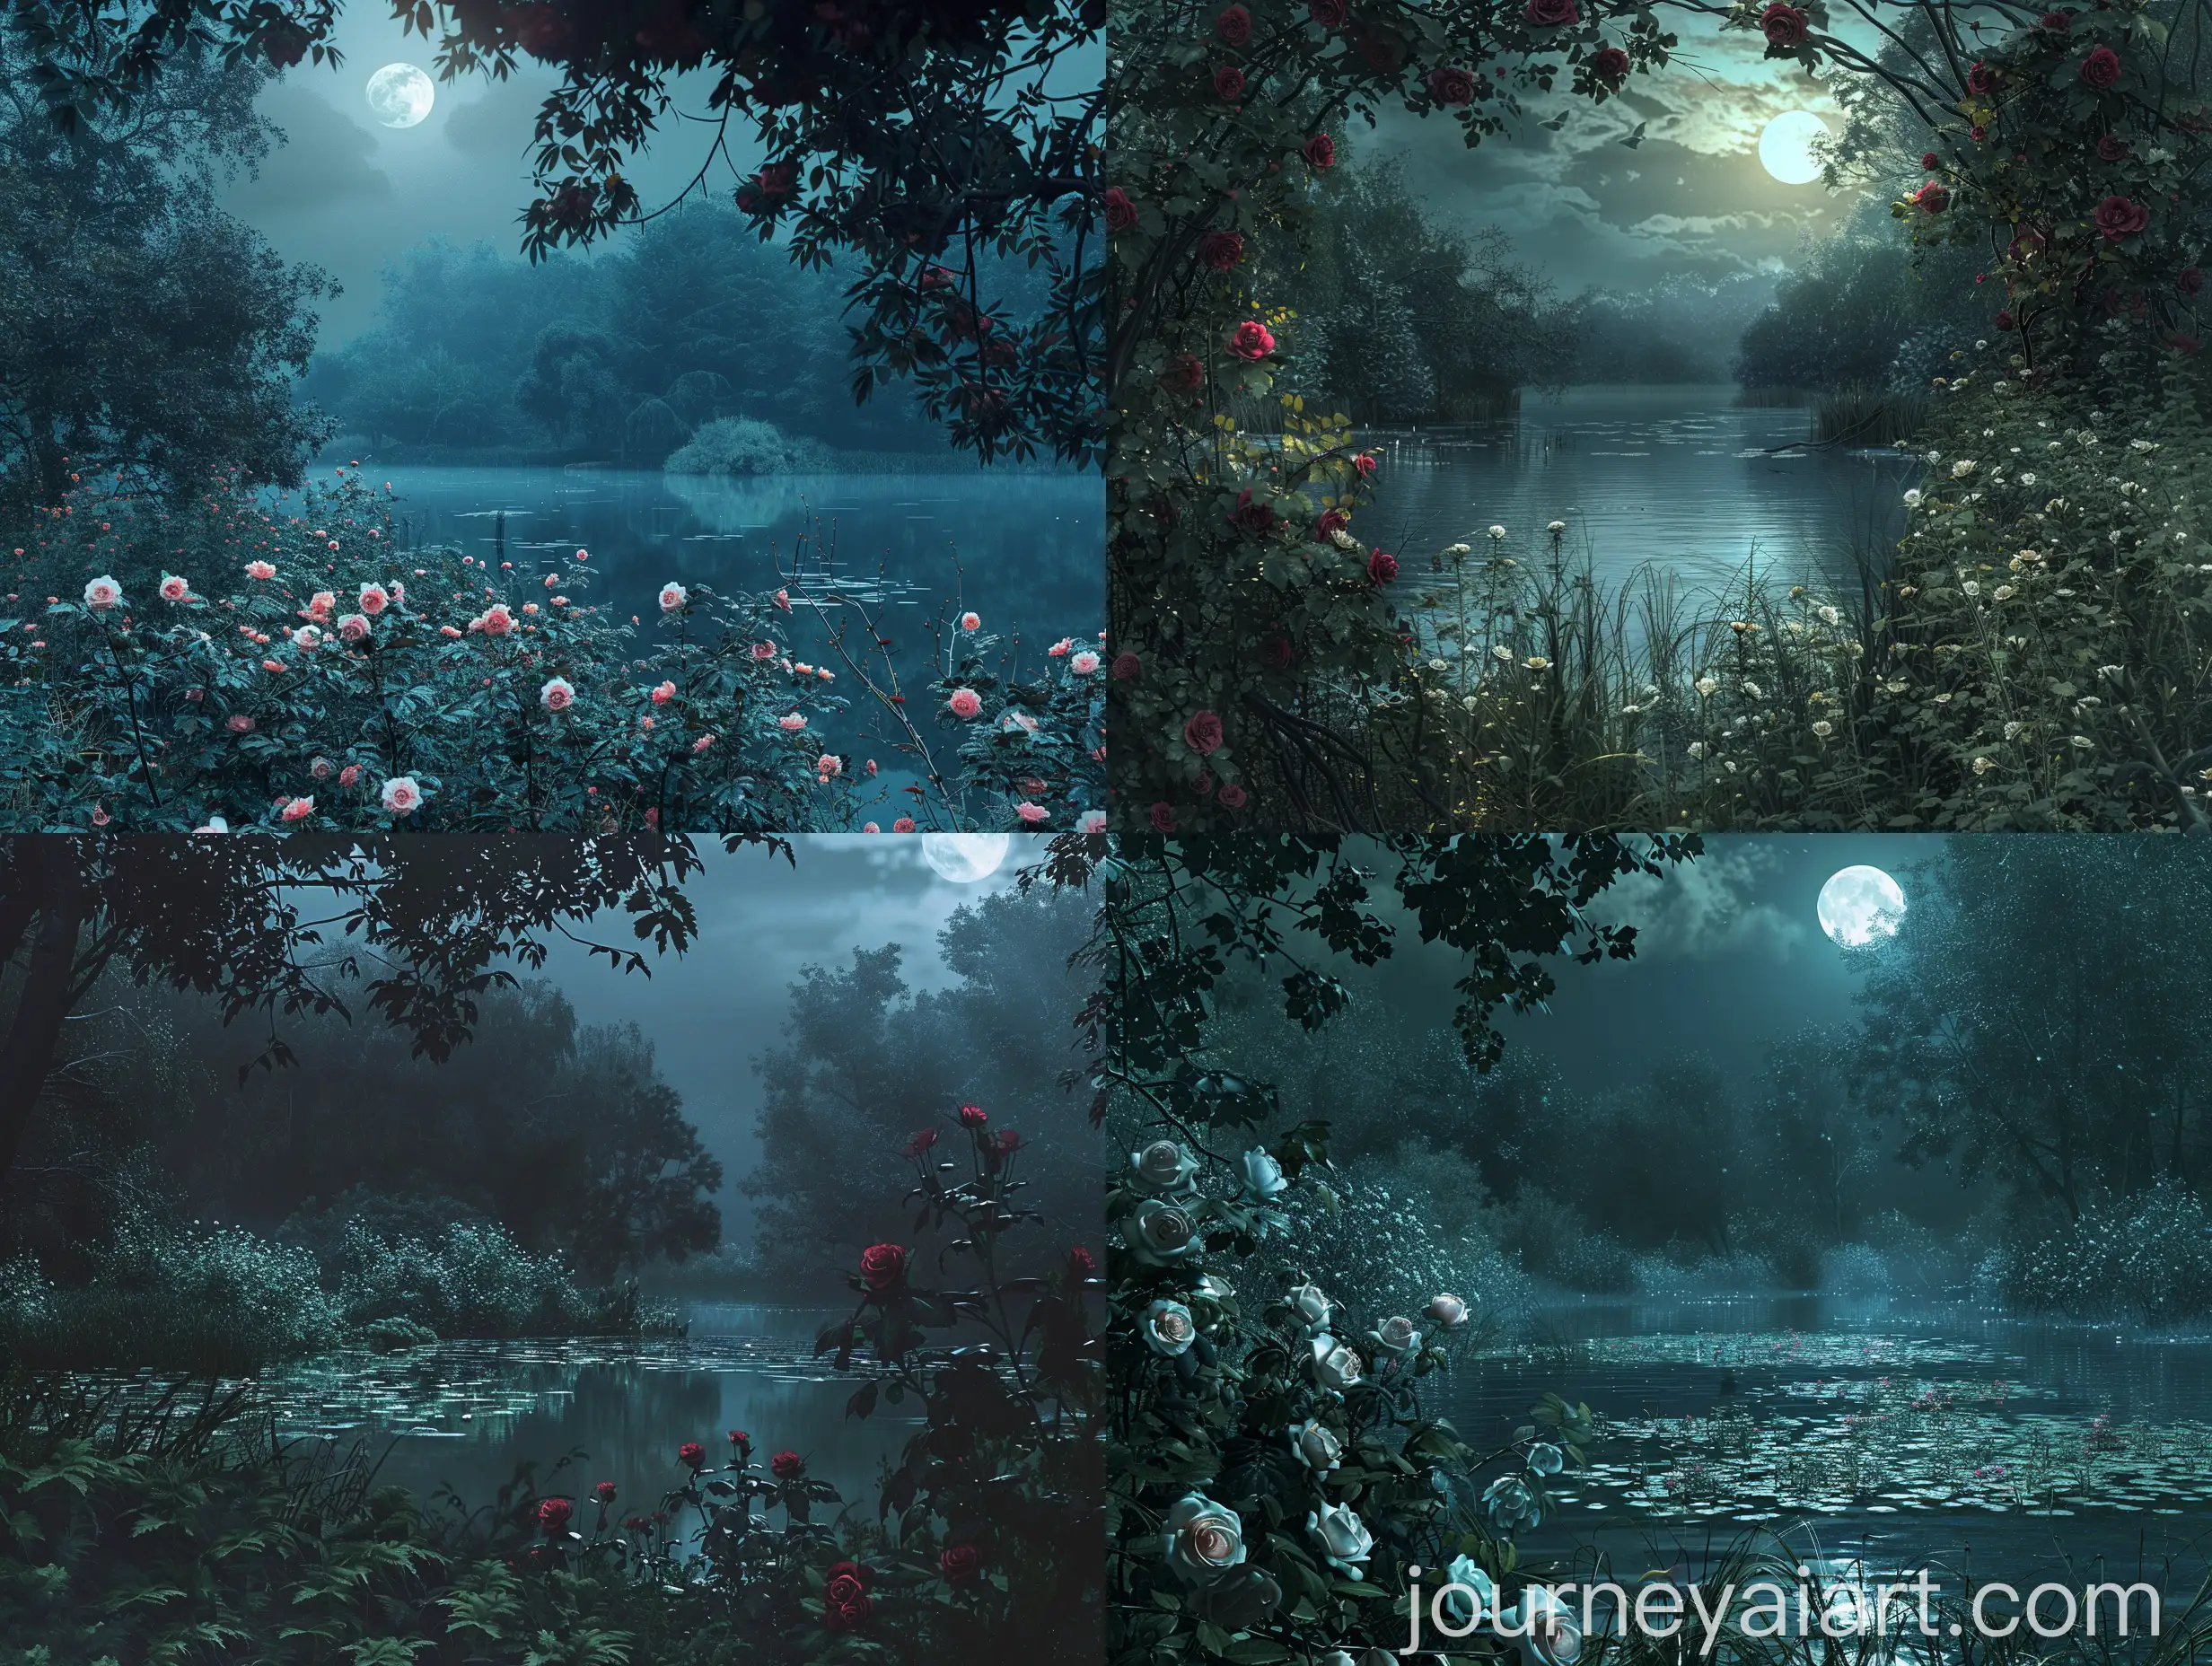 Mysterious-Forest-with-Calm-Moonlit-Lake-and-Wild-Roses